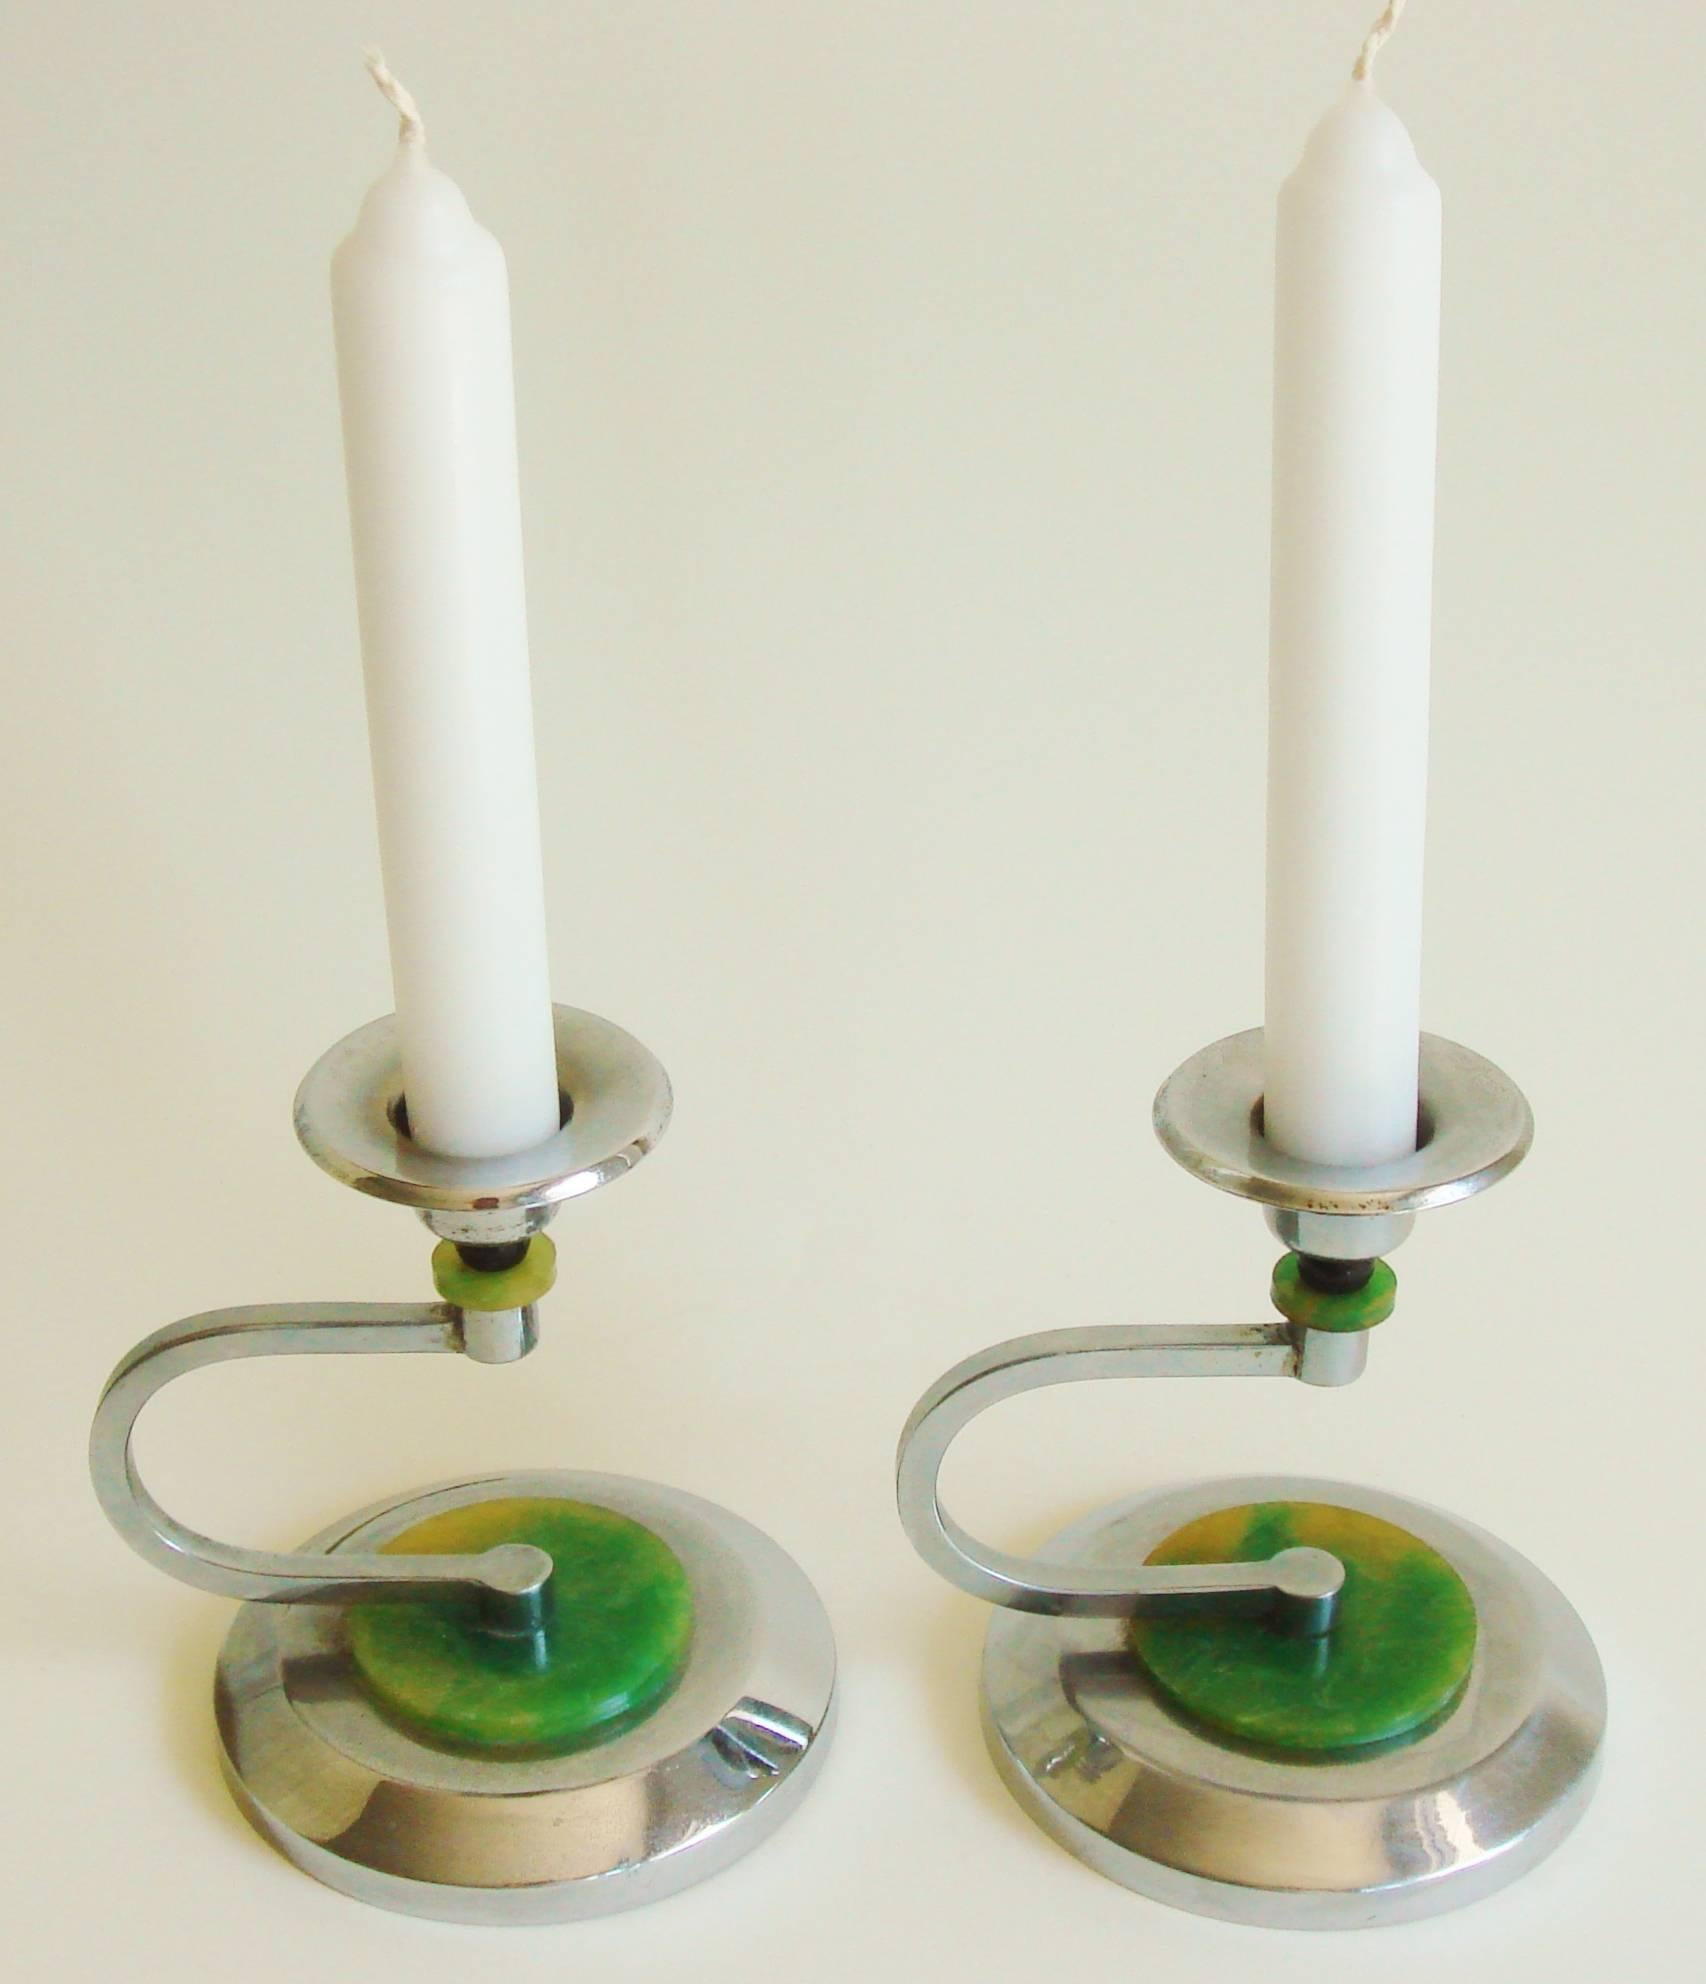 Pair of English Art Deco Chrome Candlesticks with Black & Green Bakelite Accents 2